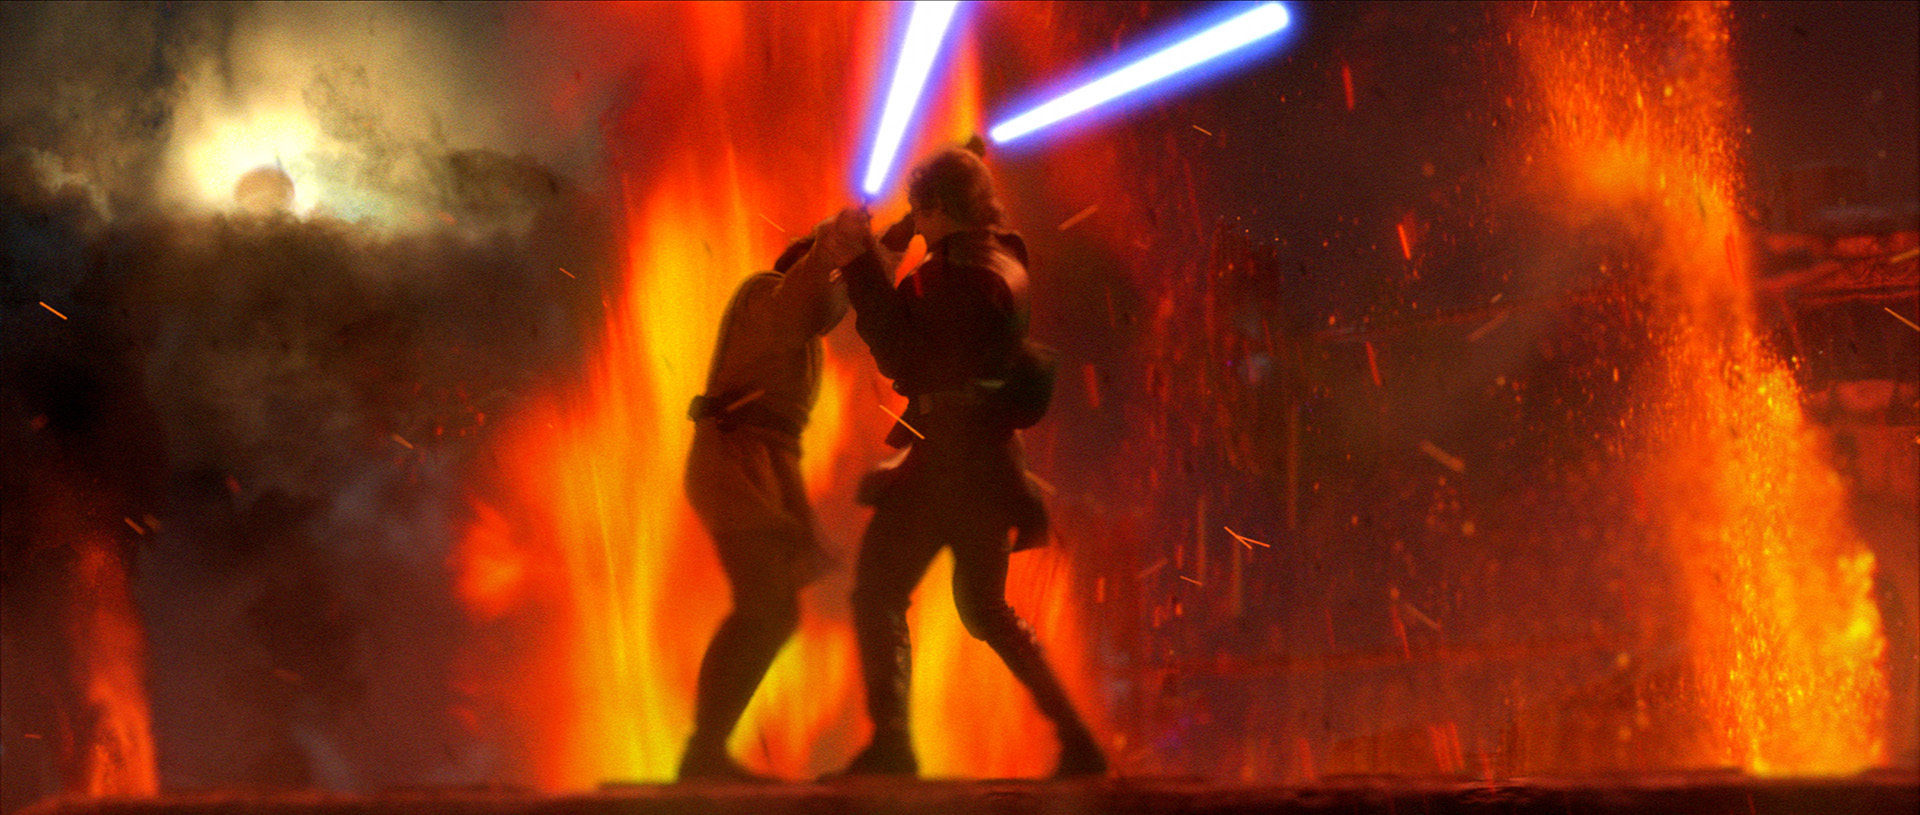 download the new version for android Star Wars Ep. III: Revenge of the Sith